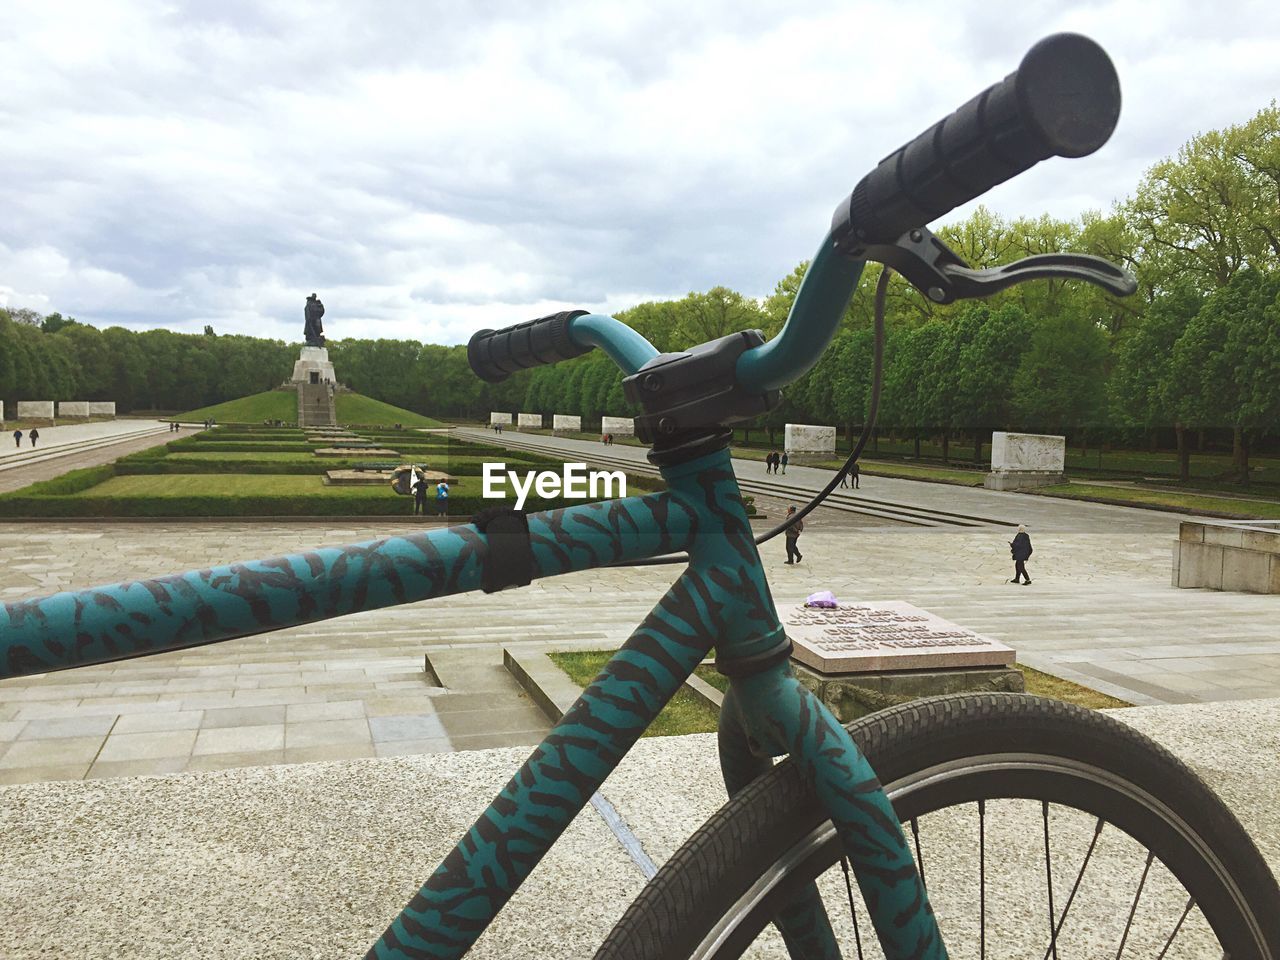 View of bicycle in treptower park